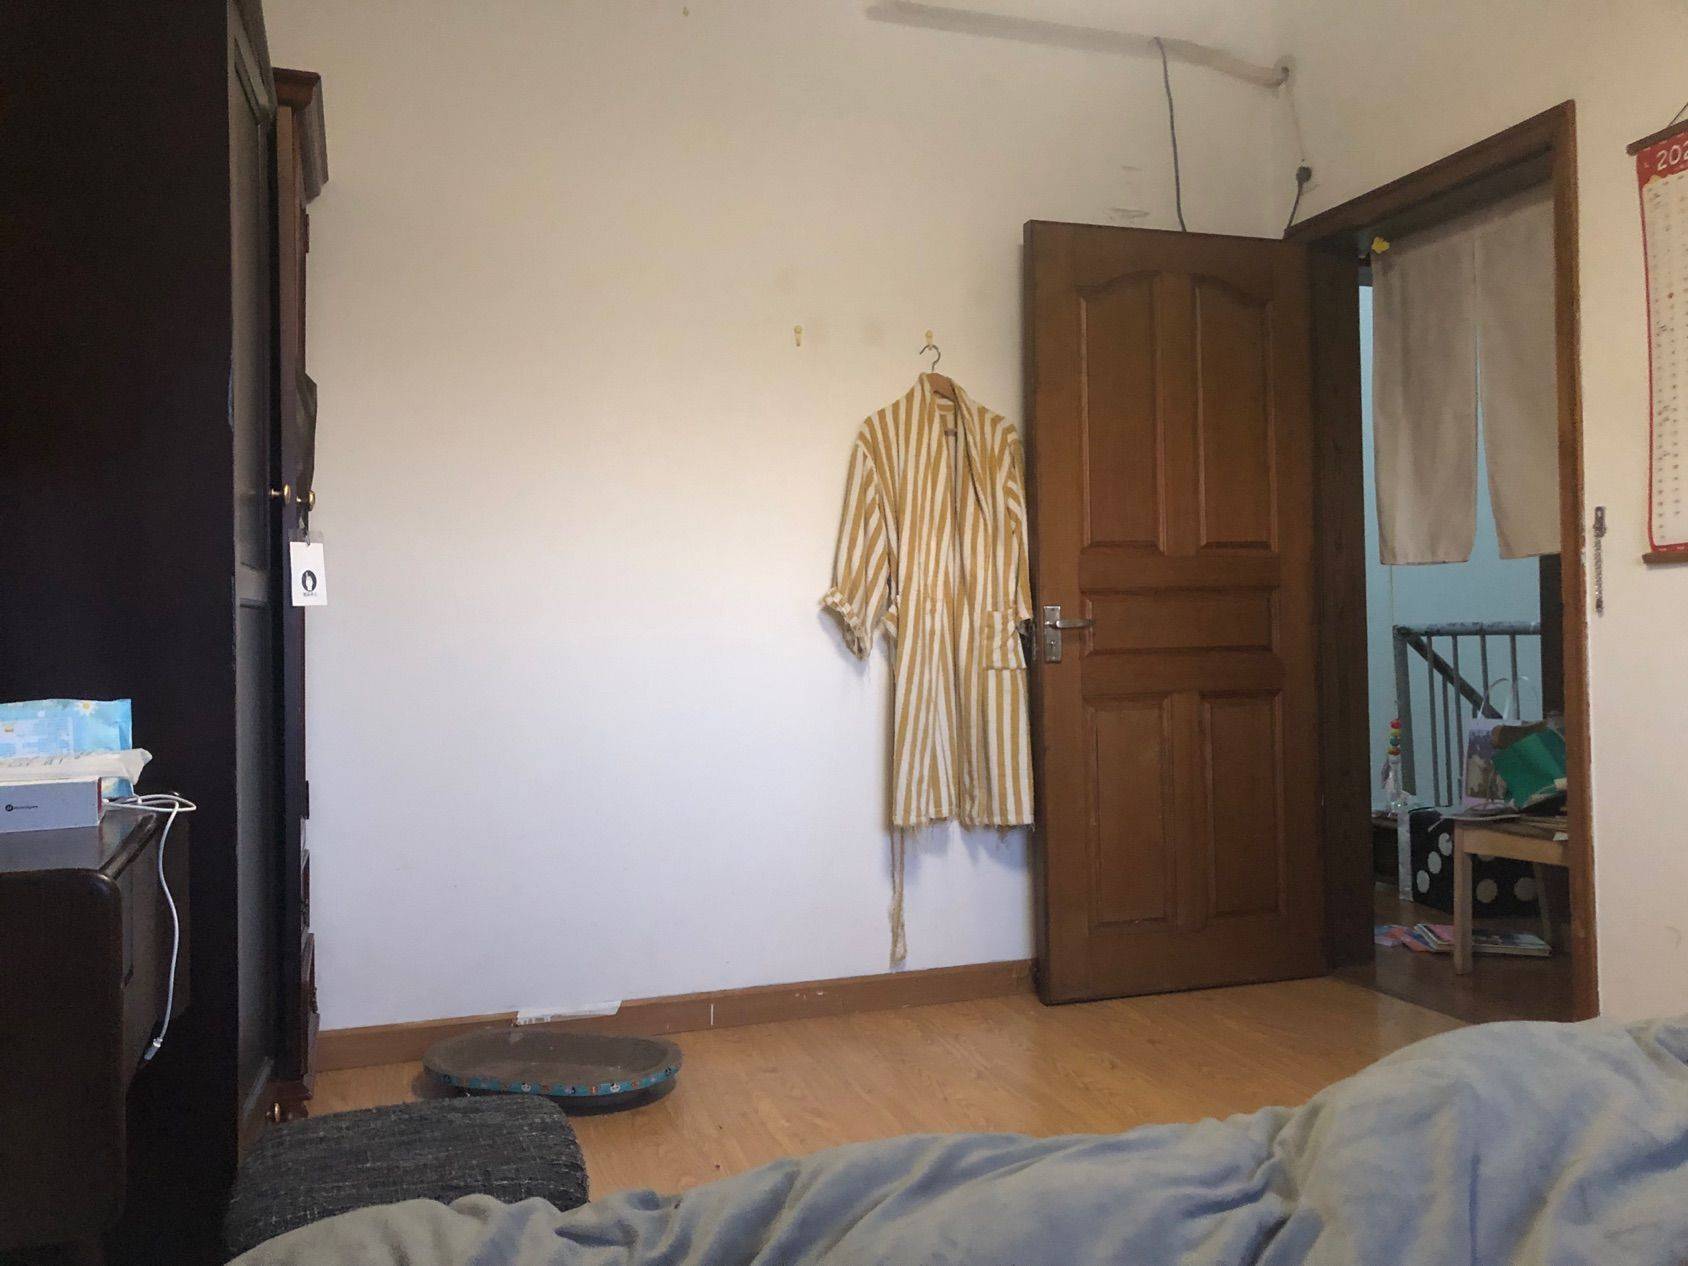 Beijing-Dongcheng-170RMB/Night,Cozy Home,Clean&Comfy,No Gender Limit,Chilled,LGBTQ Friendly